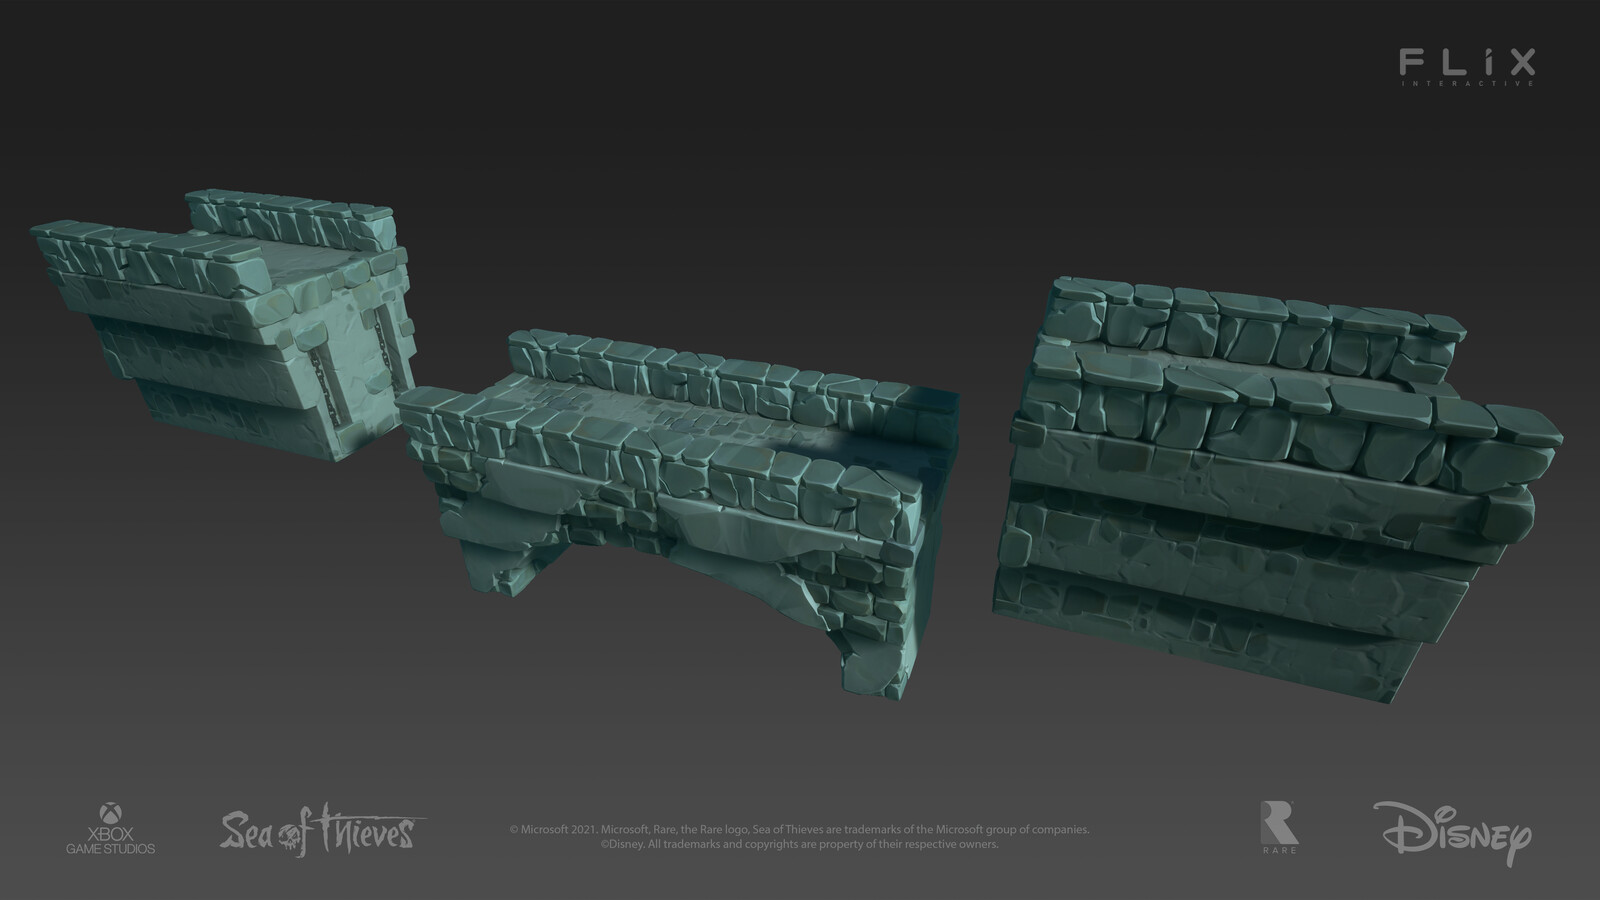 Low Poly &amp; Texturing by Me. Bridge Asset High Poly created by Glenn Donaldson. 